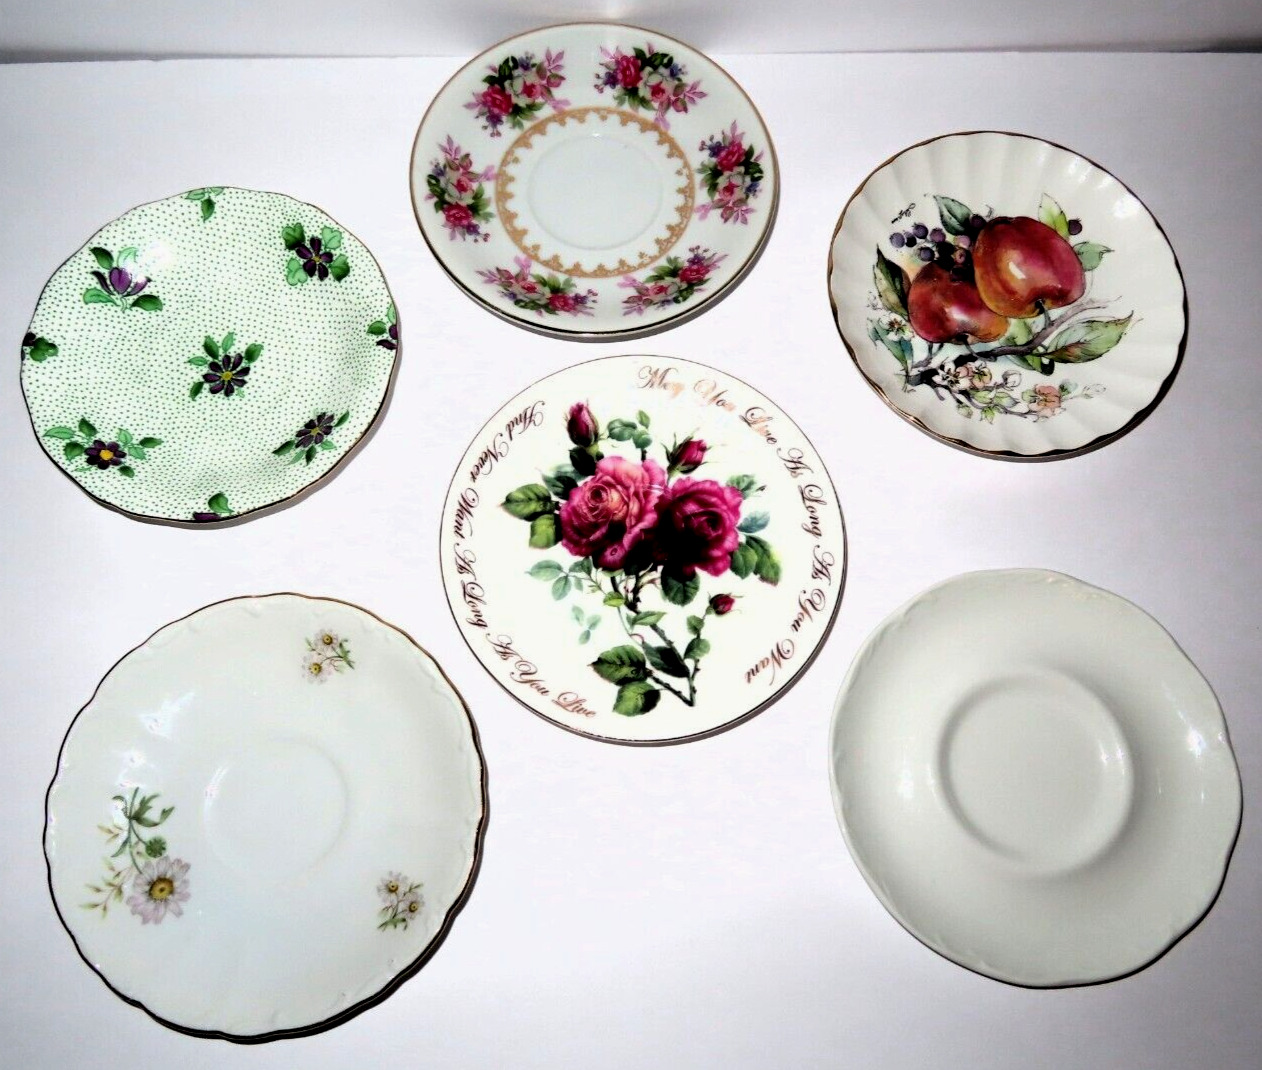 Vintage Tea Saucer Lot of Six (6) Good for Crafting Home Decor Repurposing